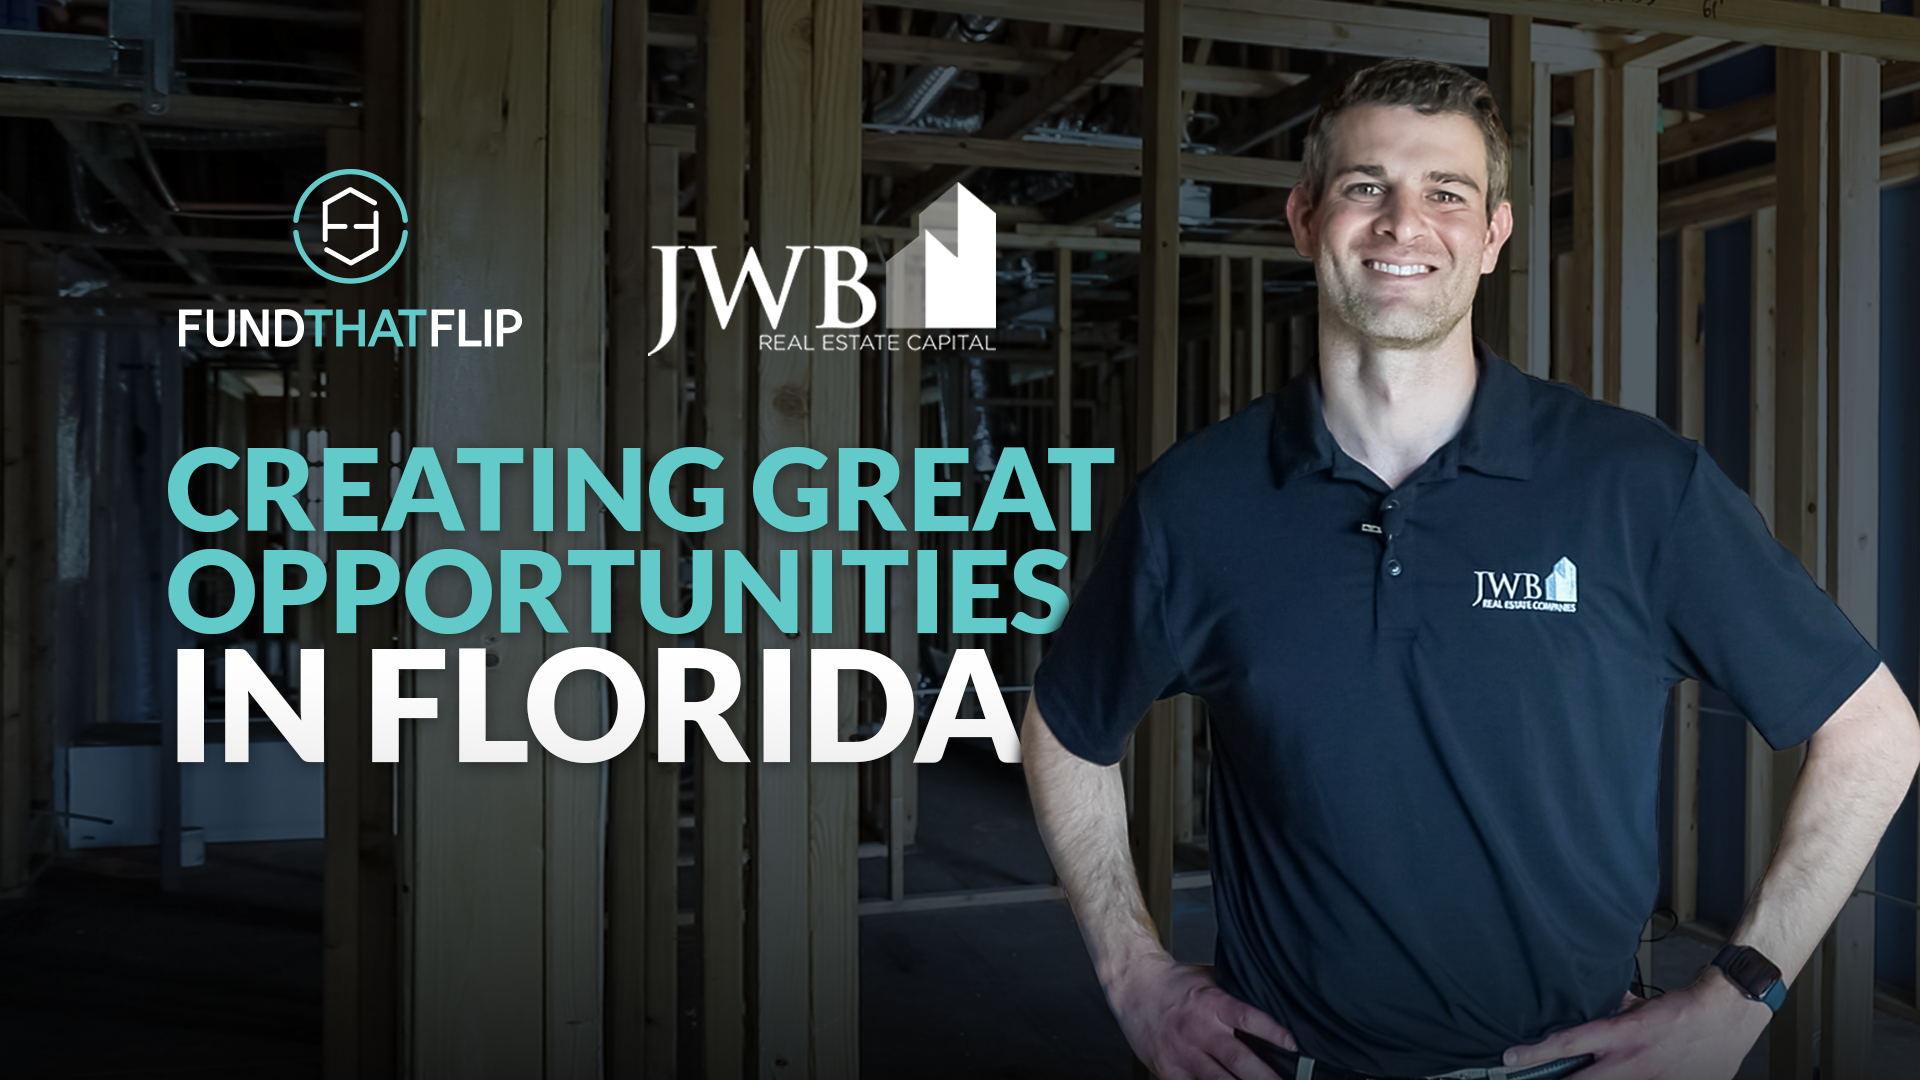 The Fund That Flip video team traveled to Jacksonville, FL to meet up with our boots-on-the-ground team, Chris Rij and Garrett Clark, and talk with Gregg Cohen, co-founder and CMO of JWB Real Estate Capital,